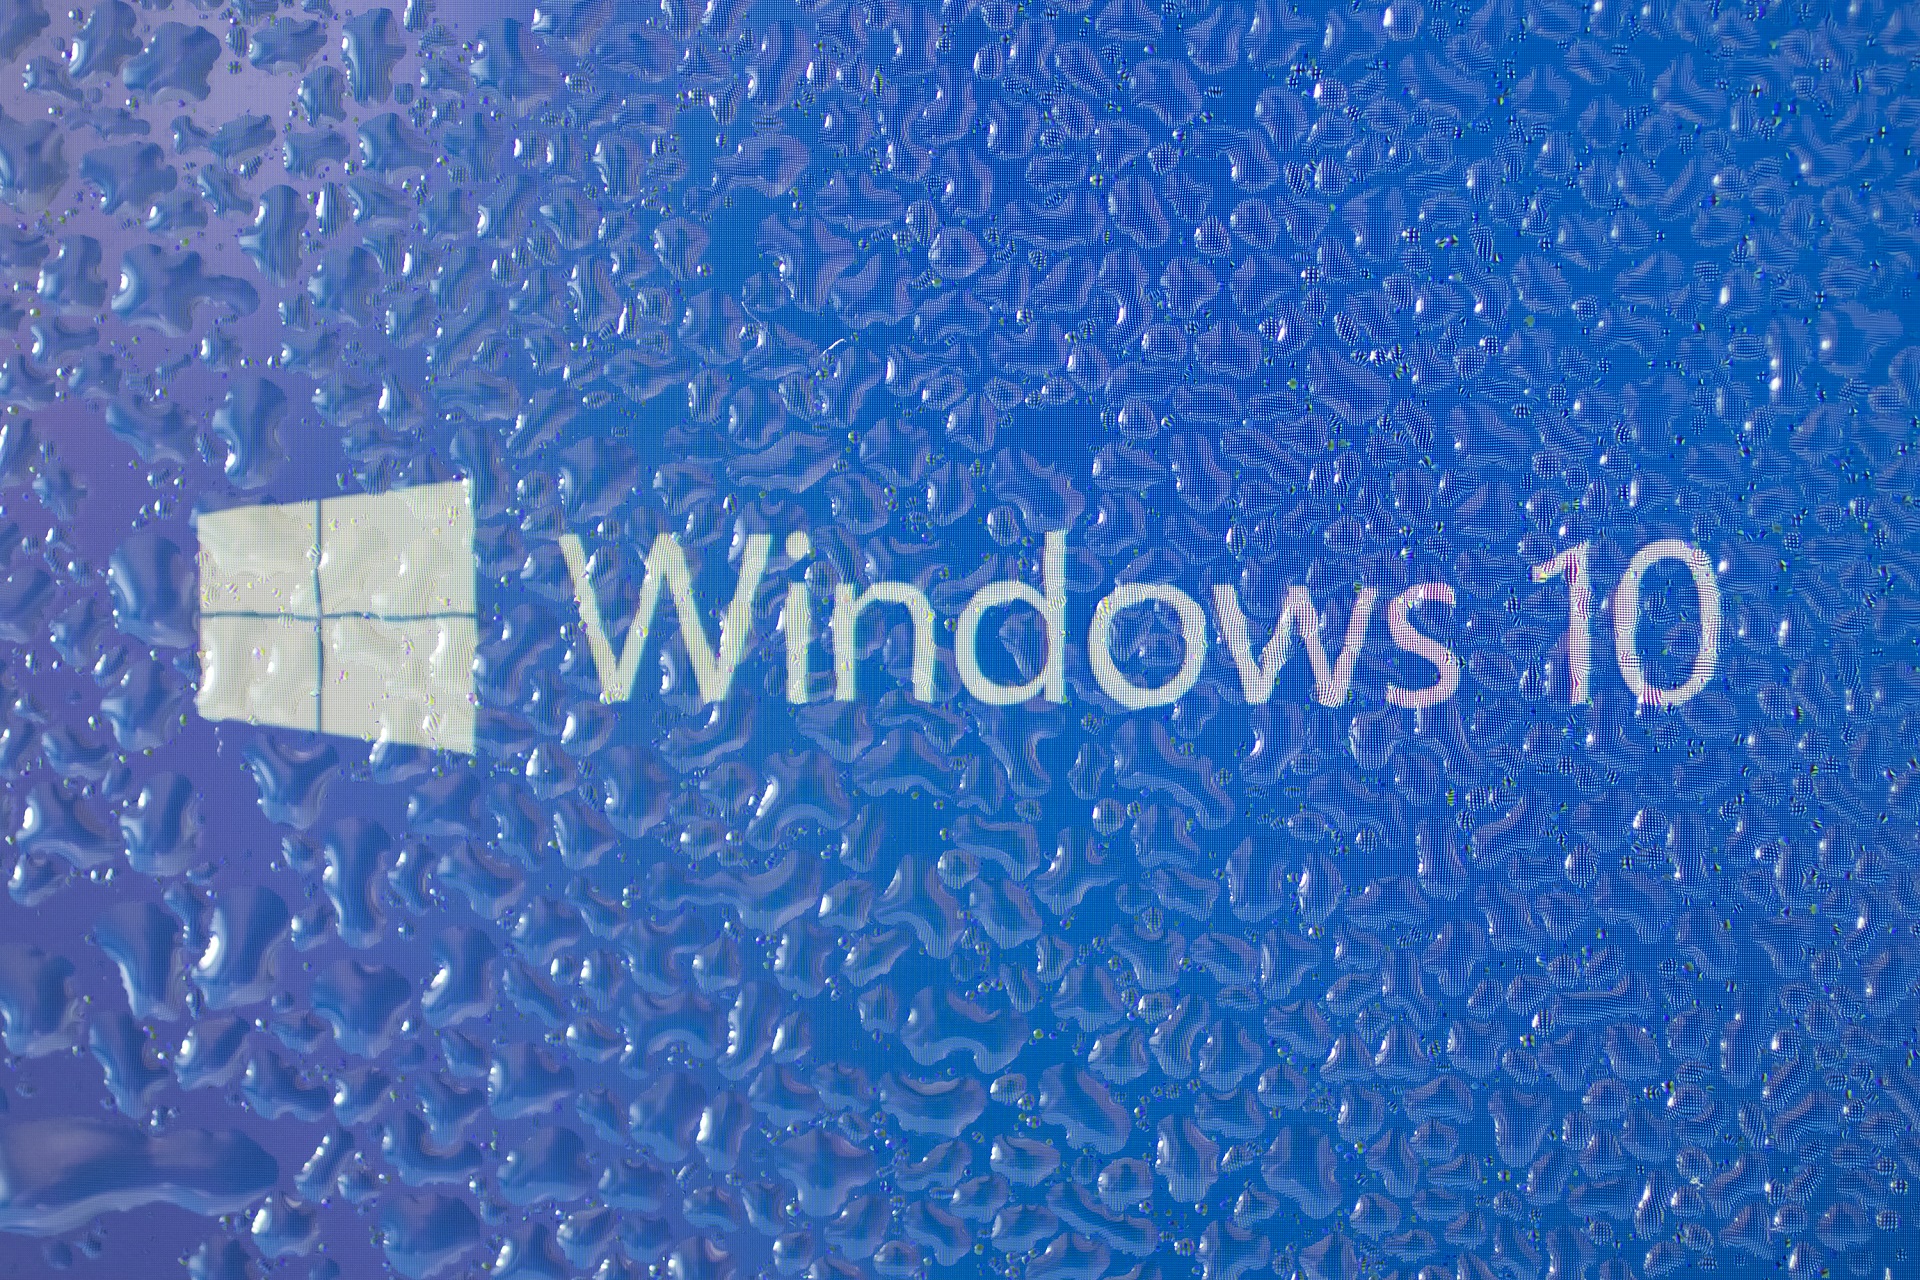 What tools to use if you want to uninstall programs on Windows 10